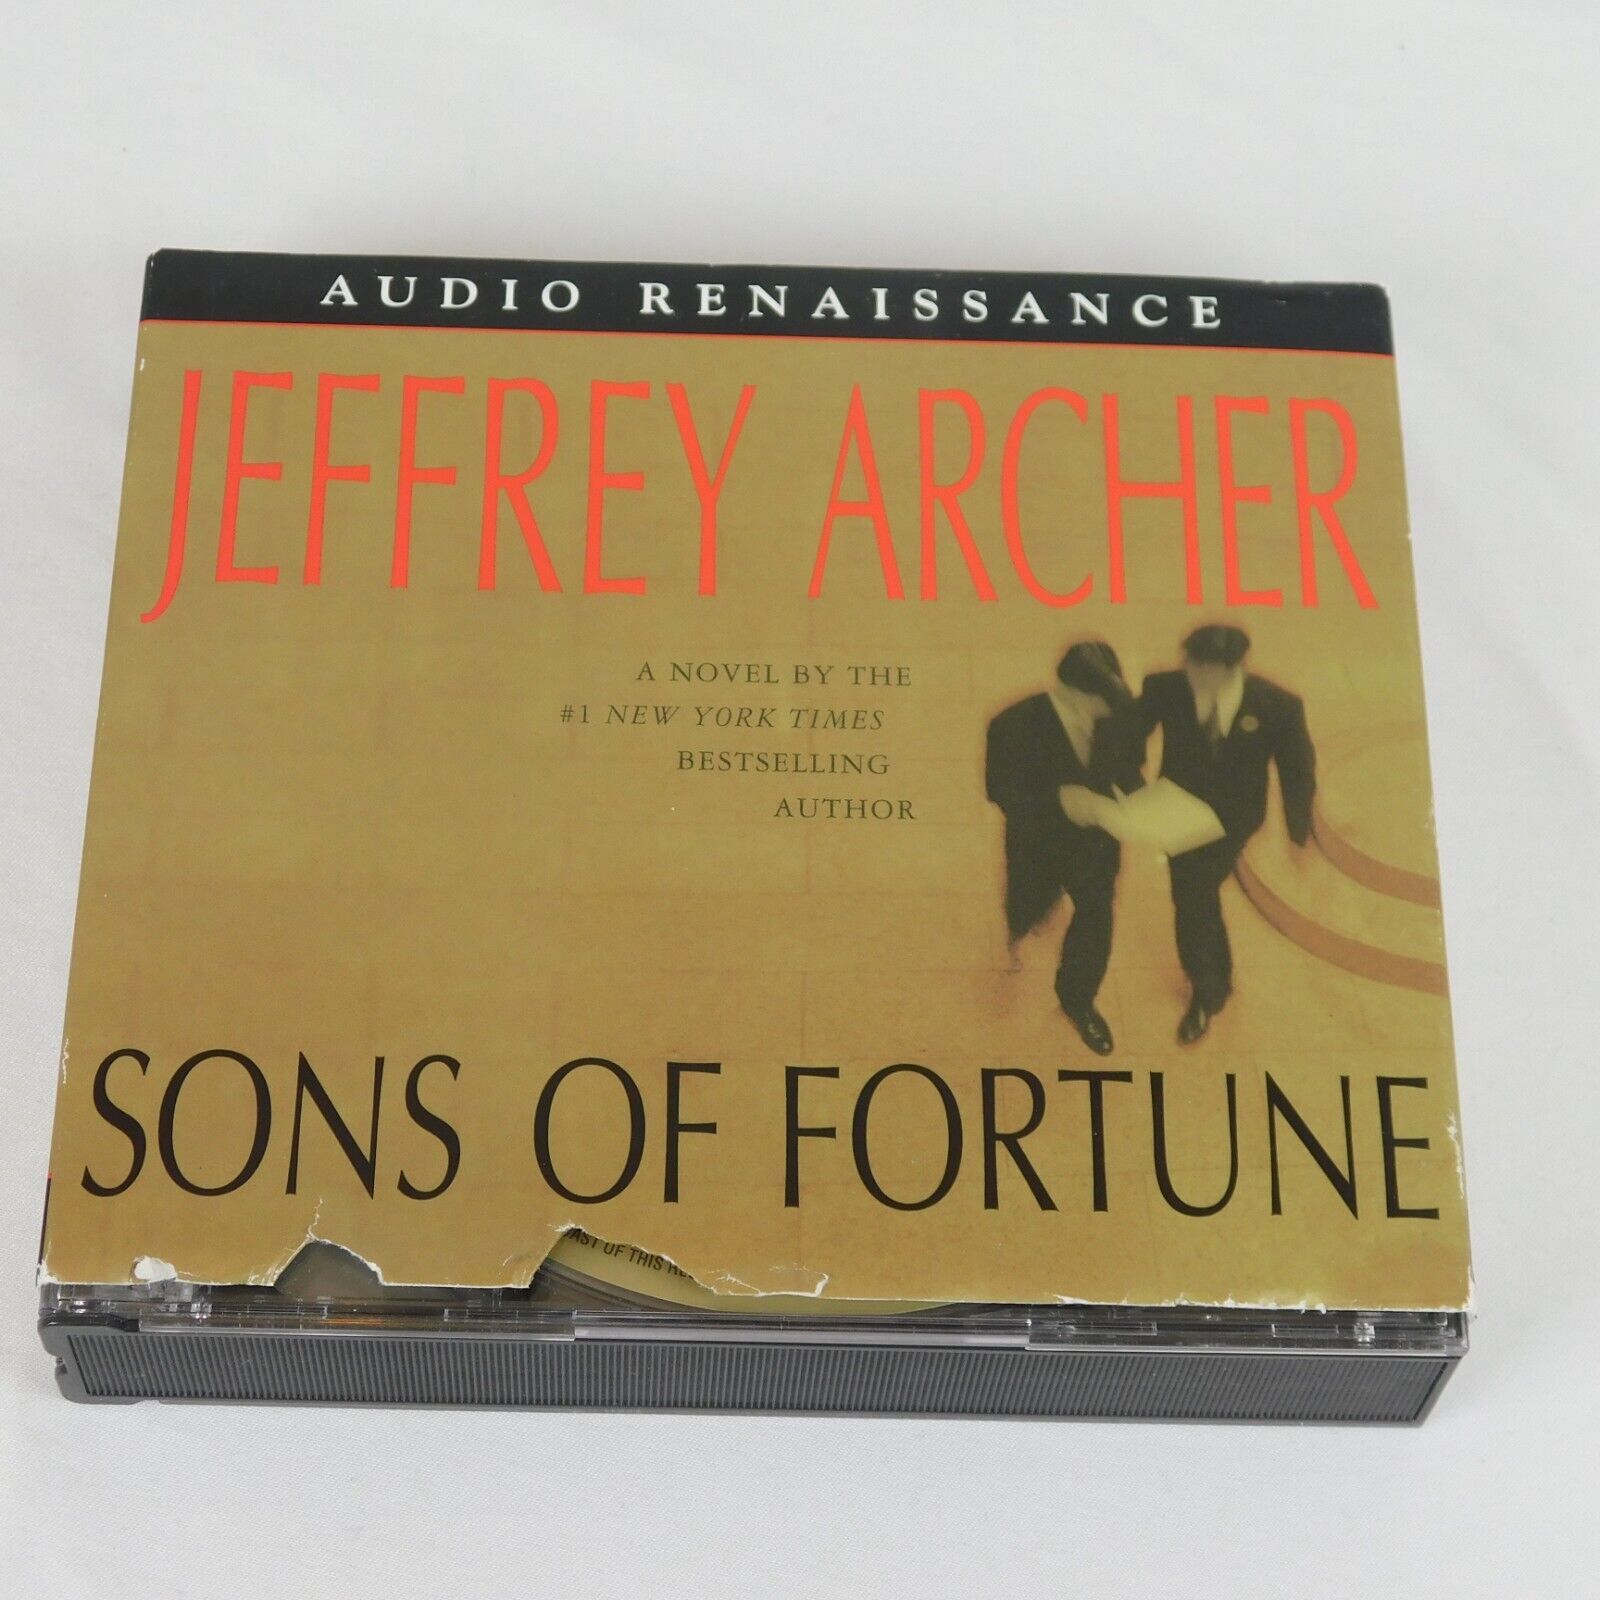 Primary image for Sons of Fortune by Jeffrey Archer Audio Book 5 CD Fiction Novel Abridged 6 Hours